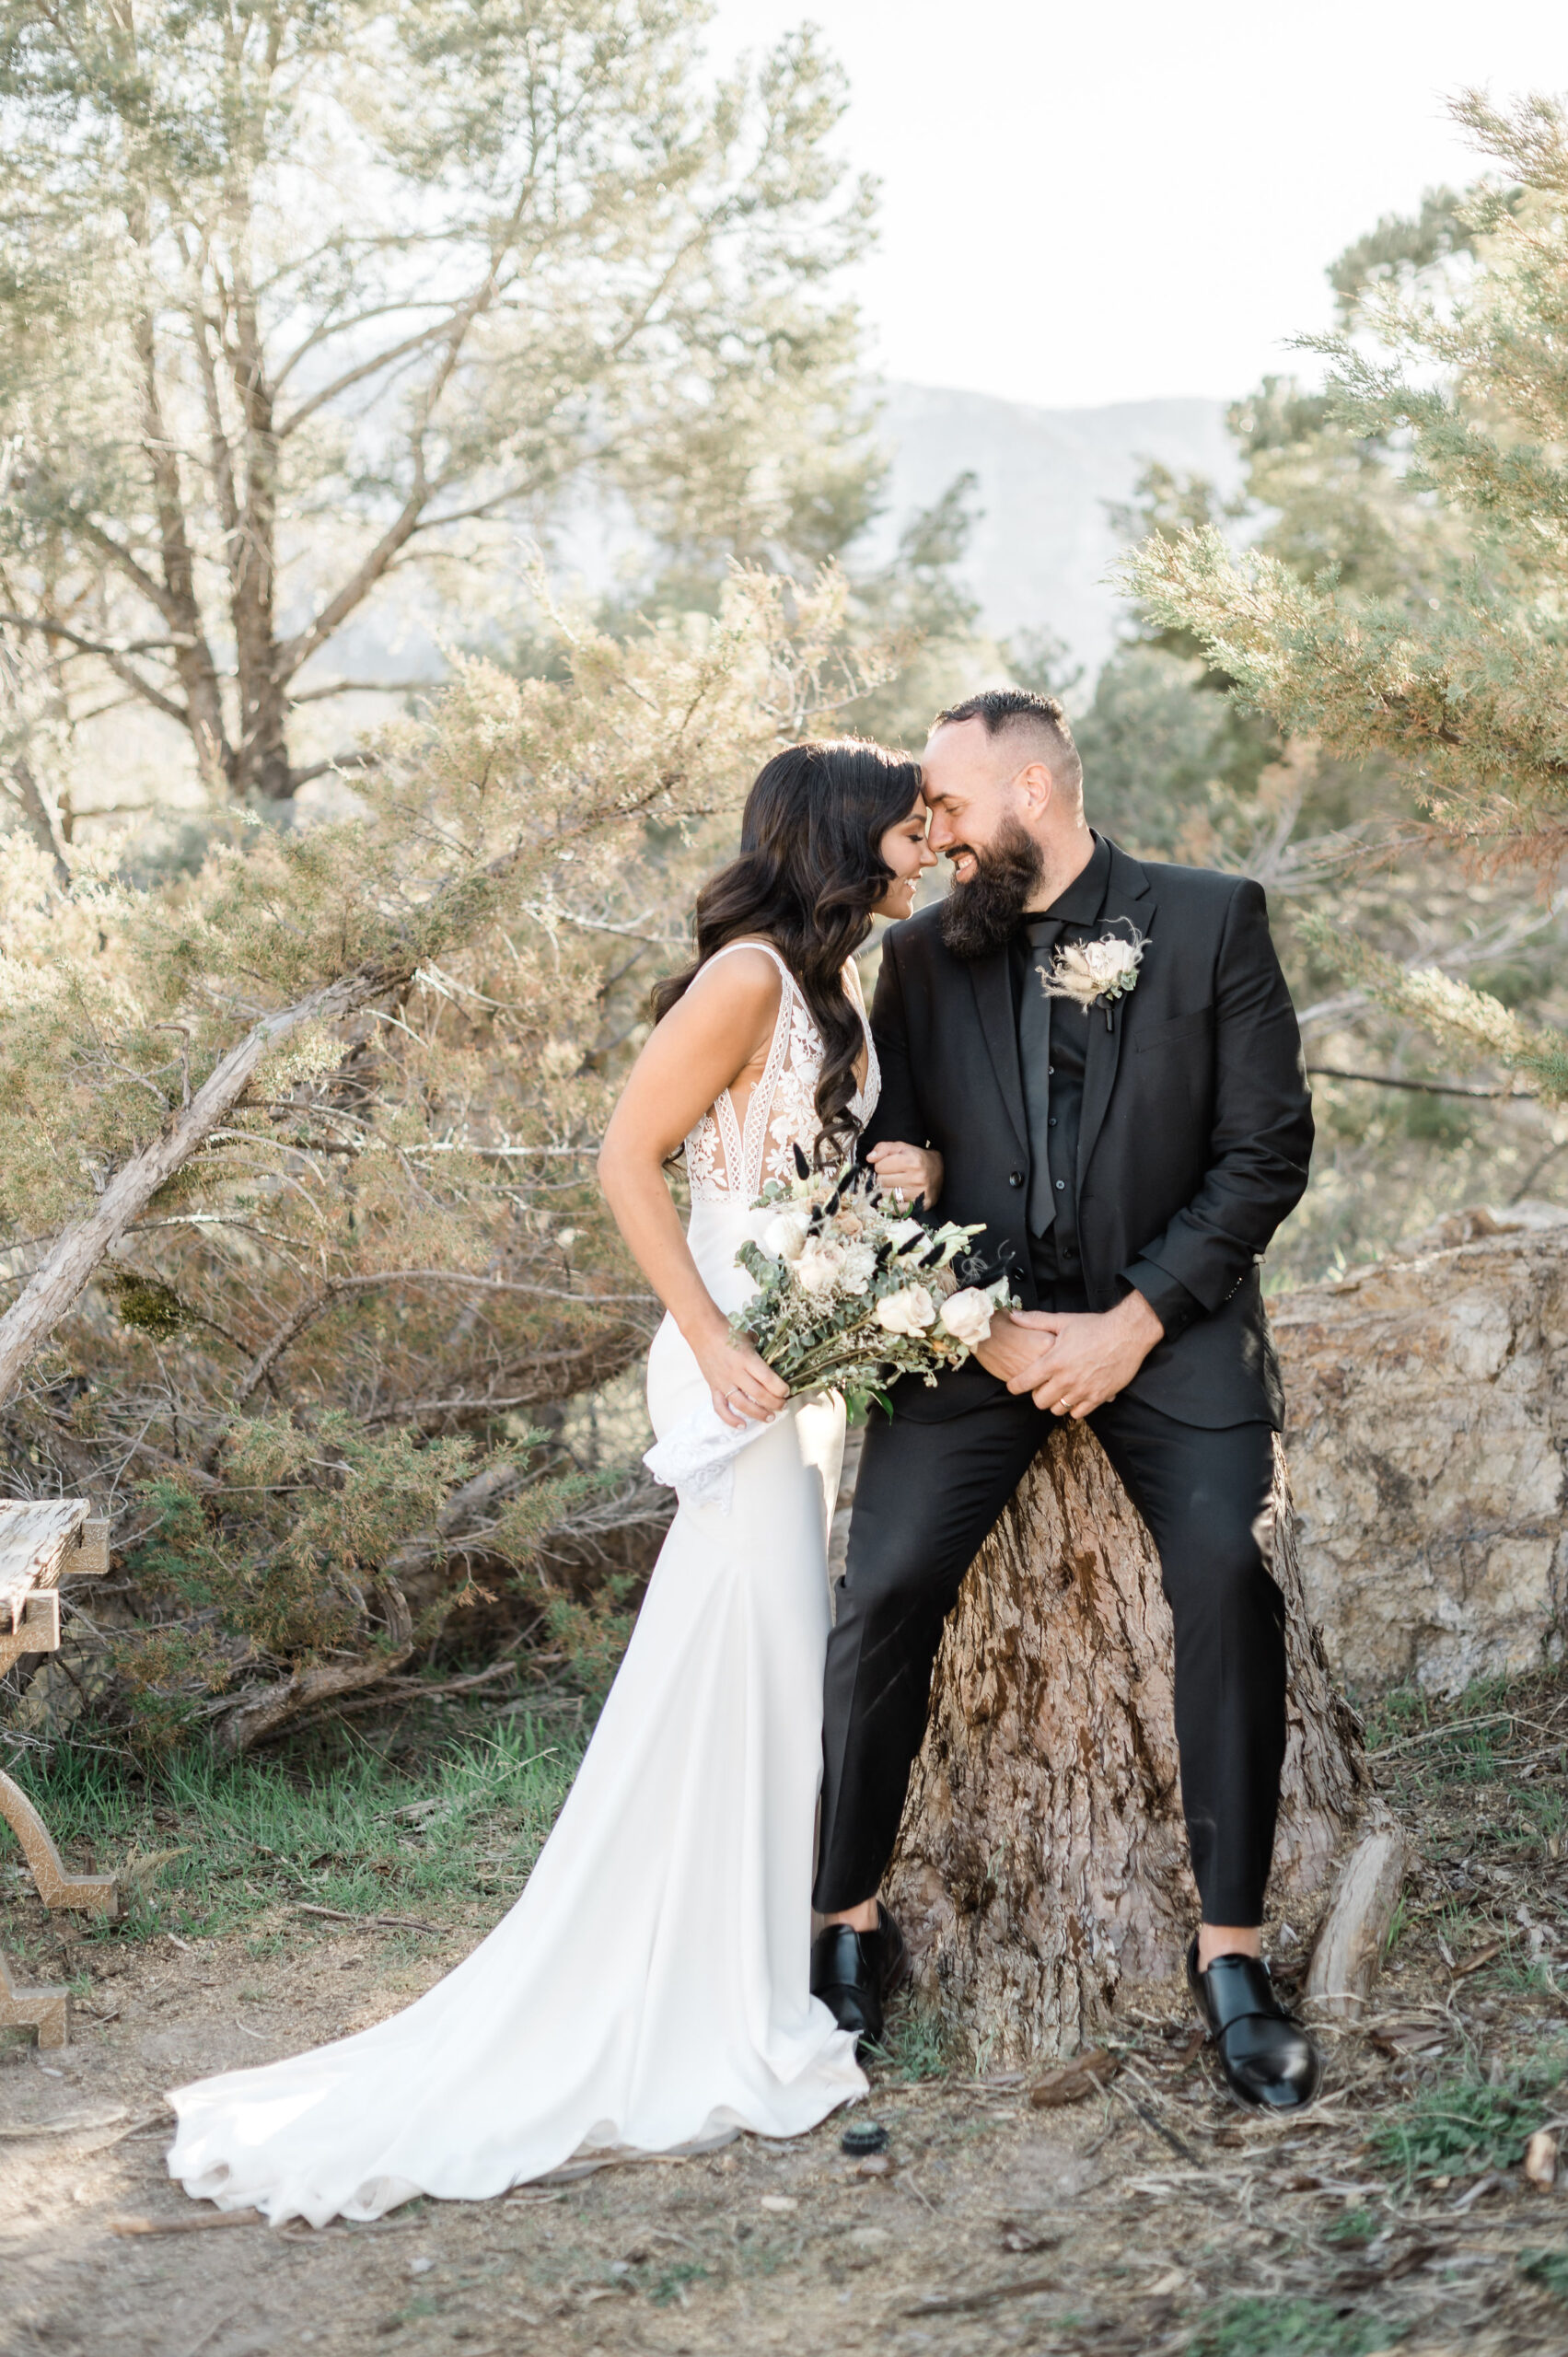 Bride and groom pressing their foreheads against each other as they smile during their Mount Charleston wedding shoot